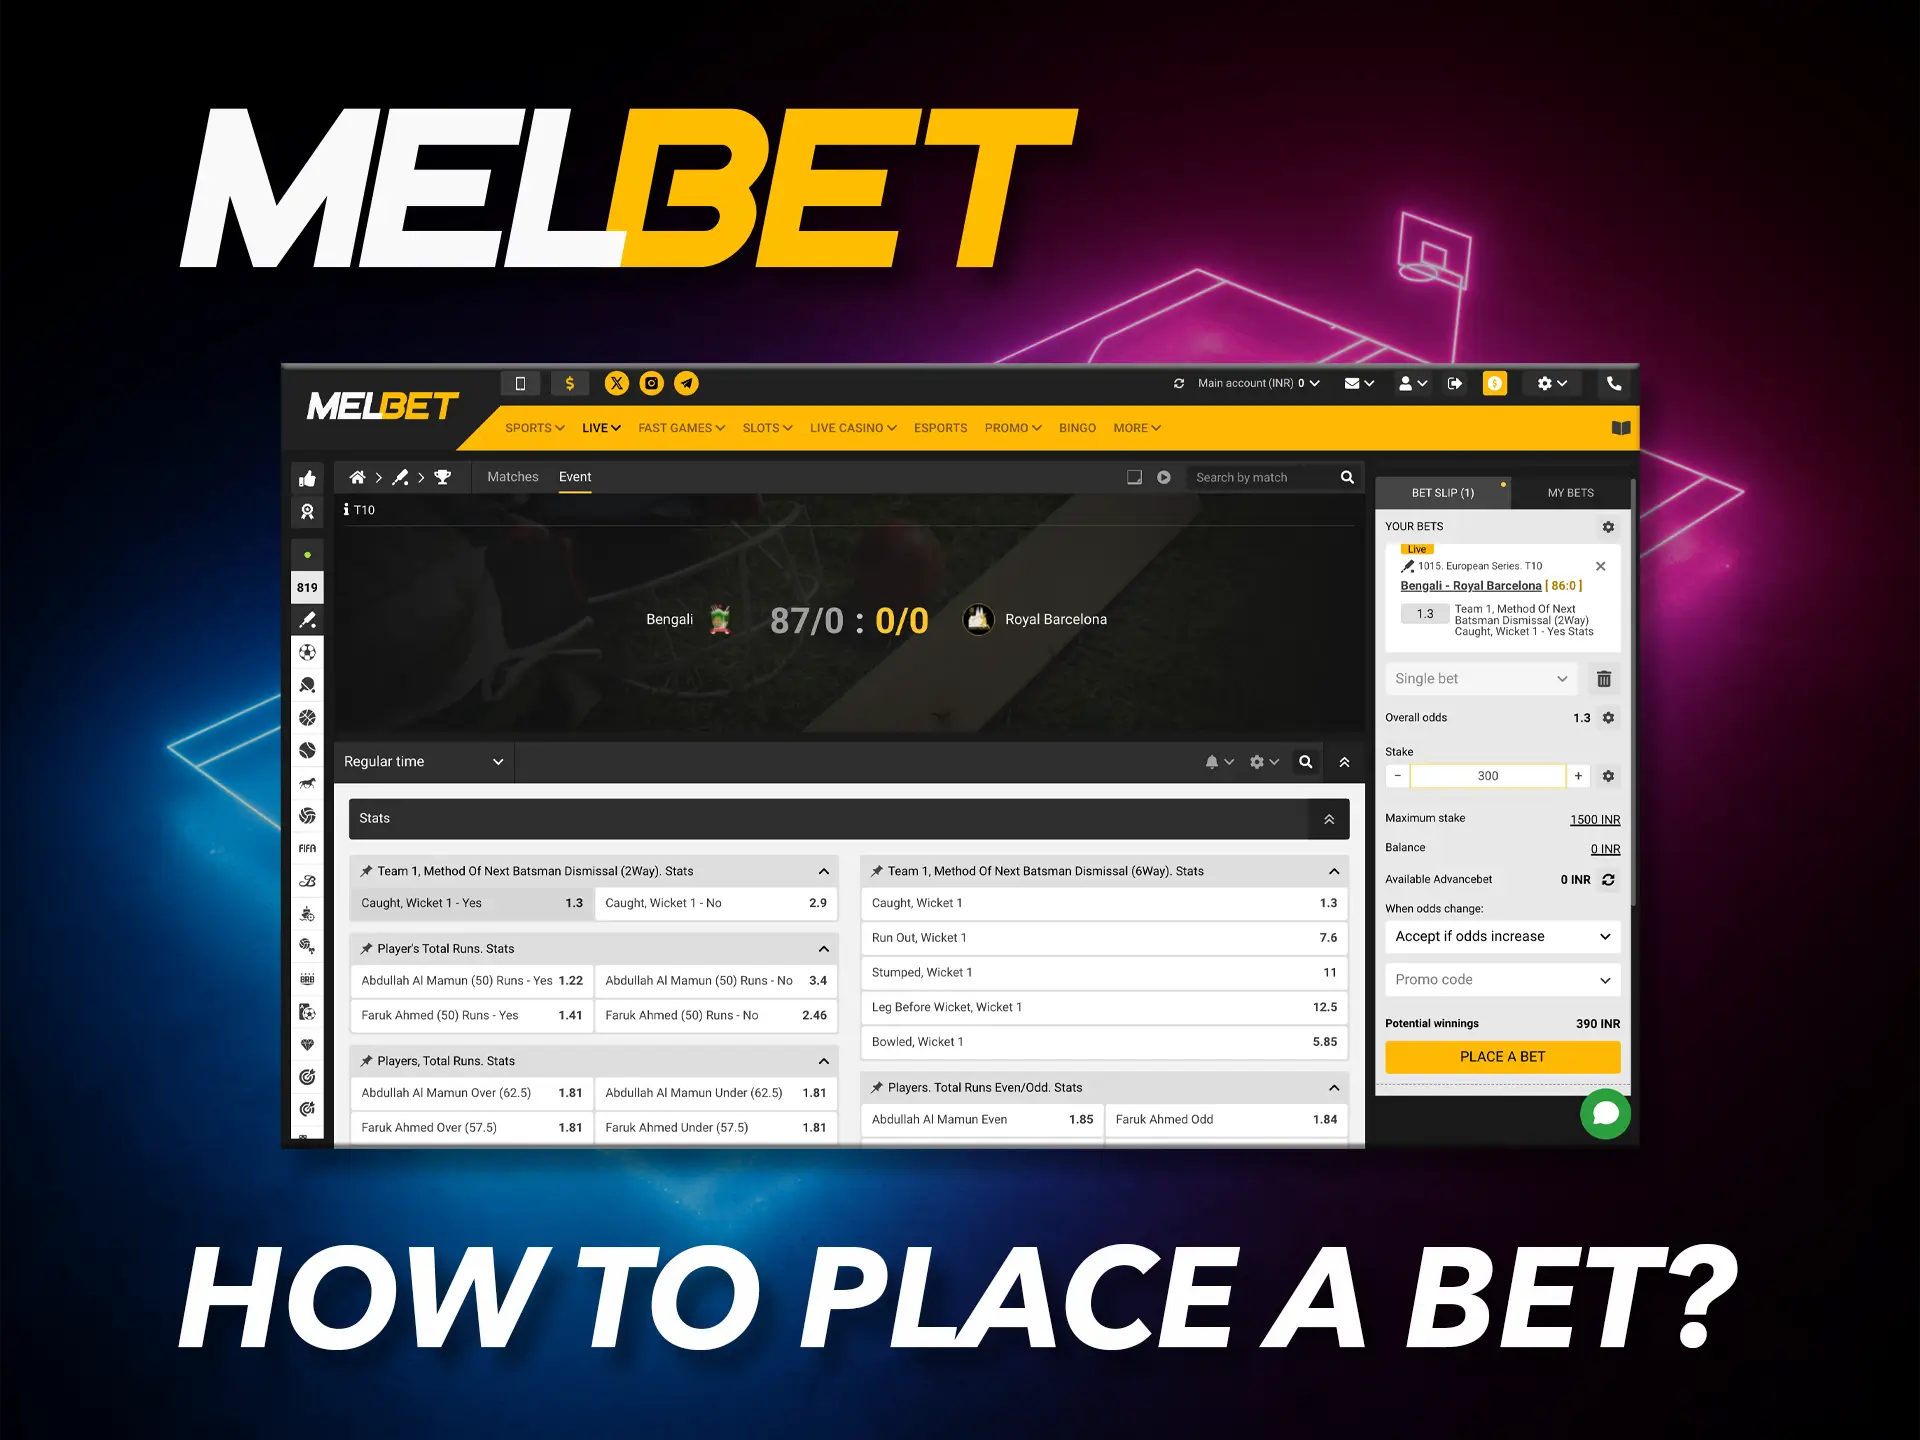 Place your bets and win with Melbet Casino.